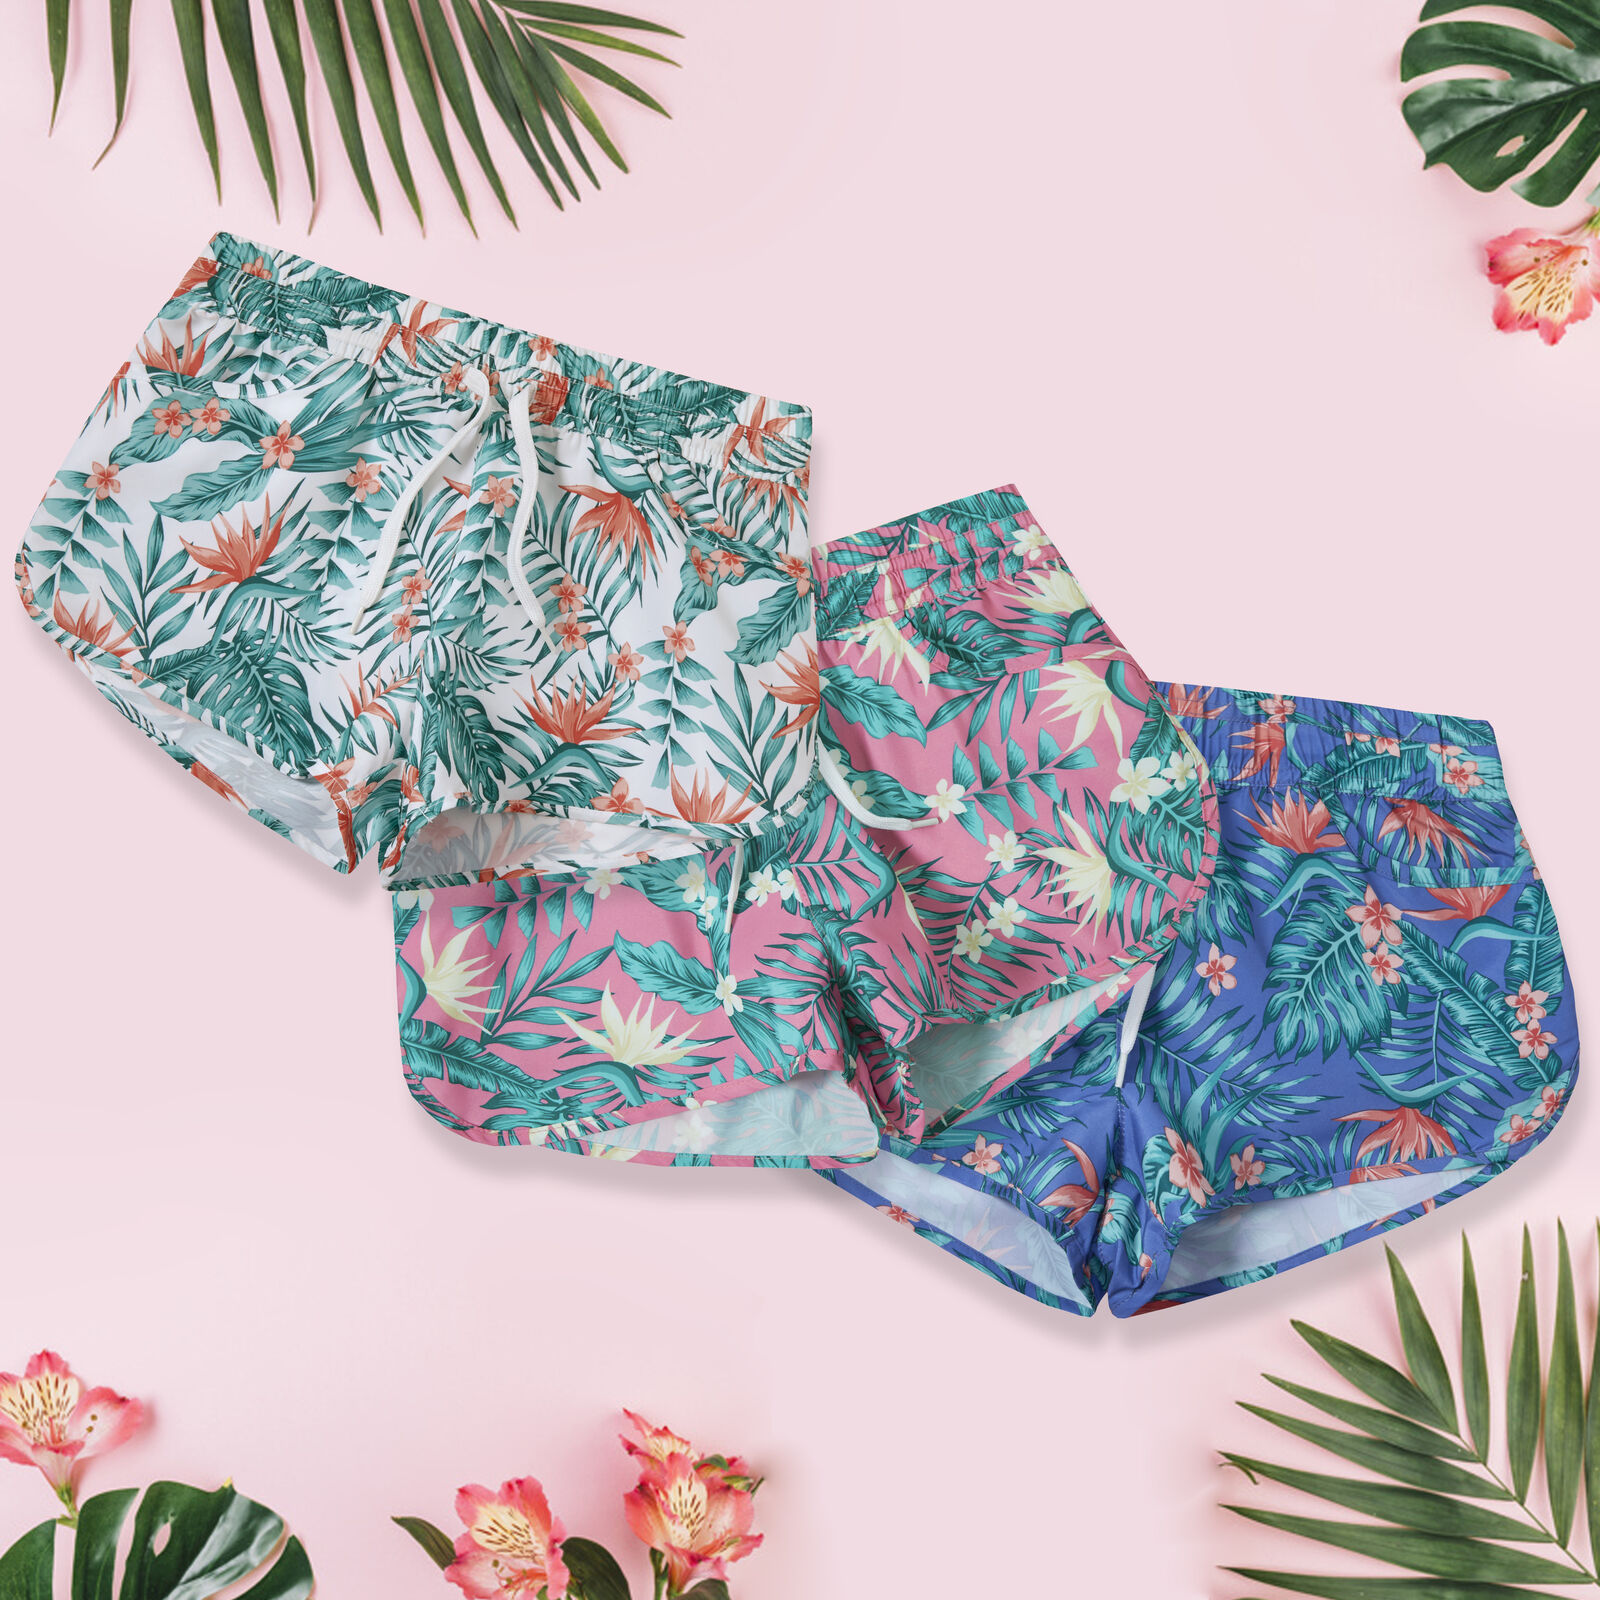 Ladies Summer Shortie Shorts Floral Swimming Beach Printed Tropical